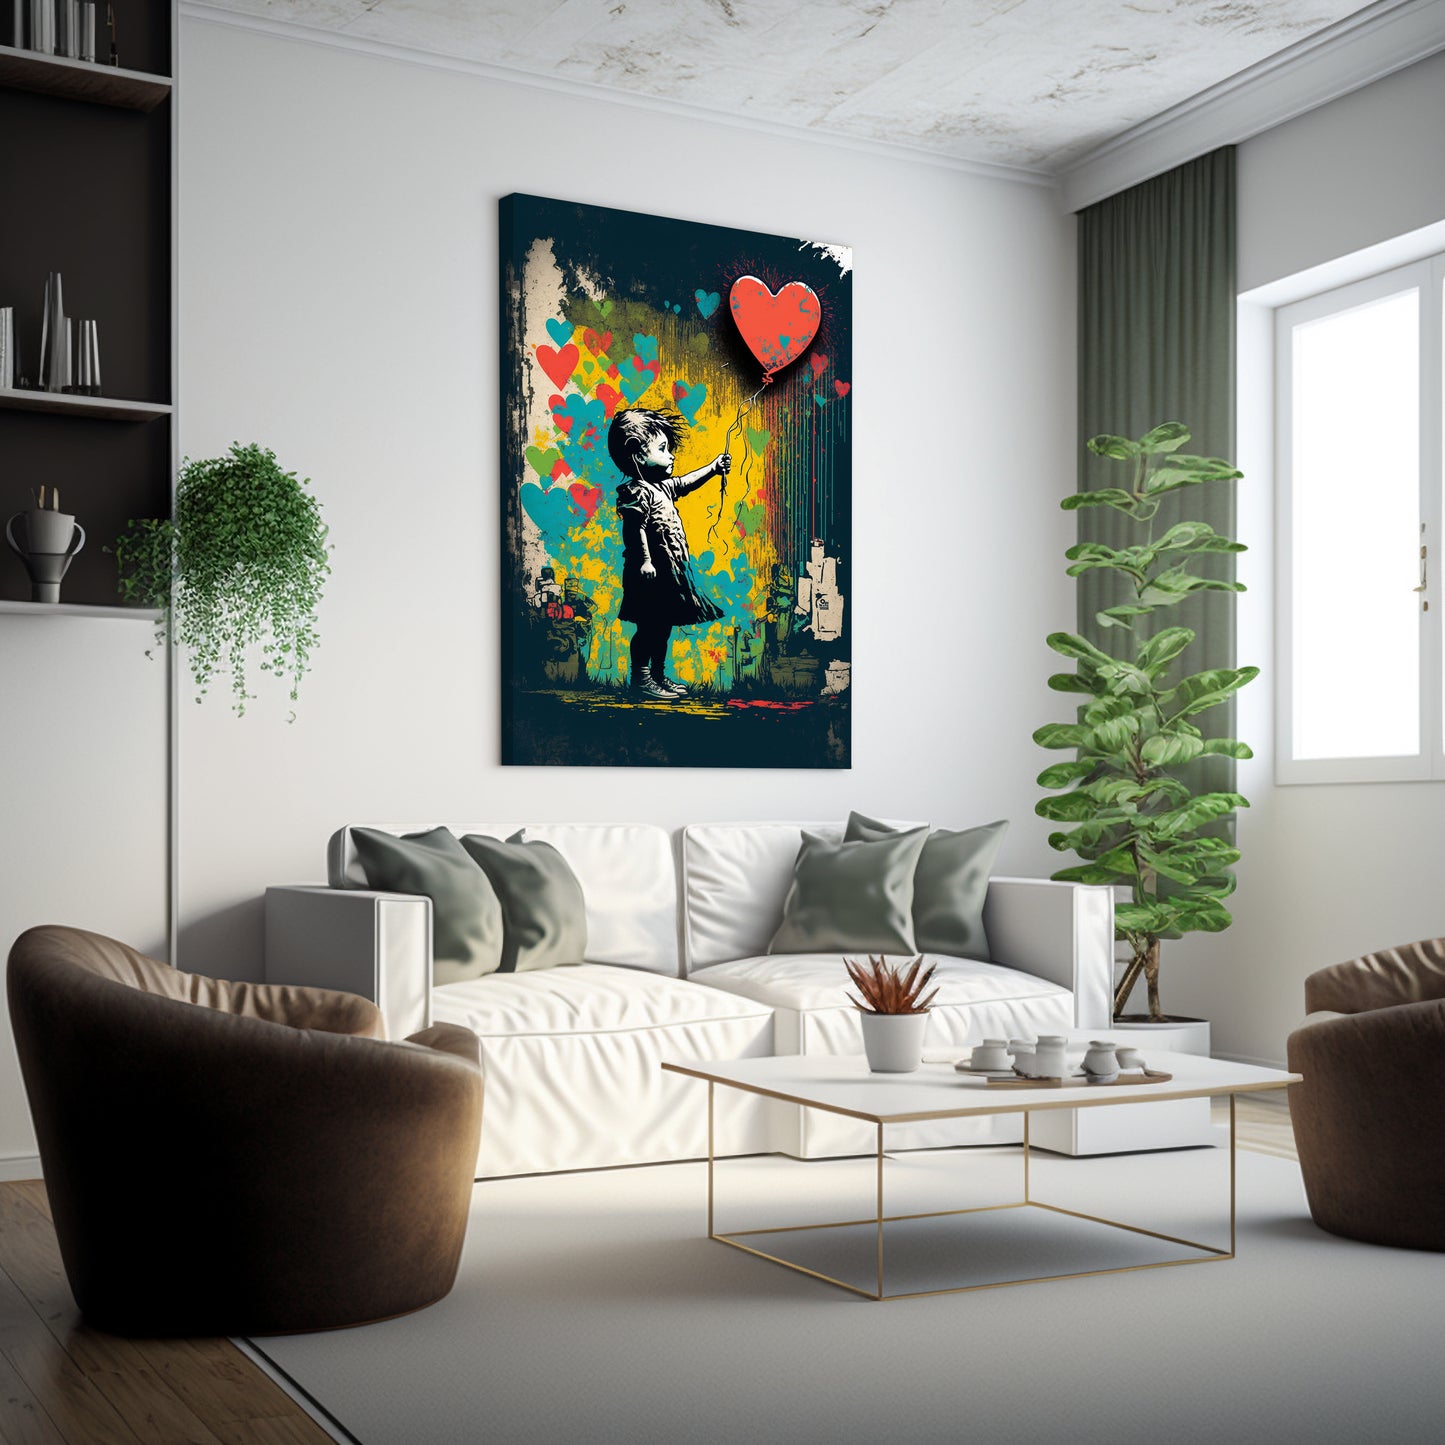 Graffiti Street Art canvas painting XXL for living room or bedroom in Banksy style